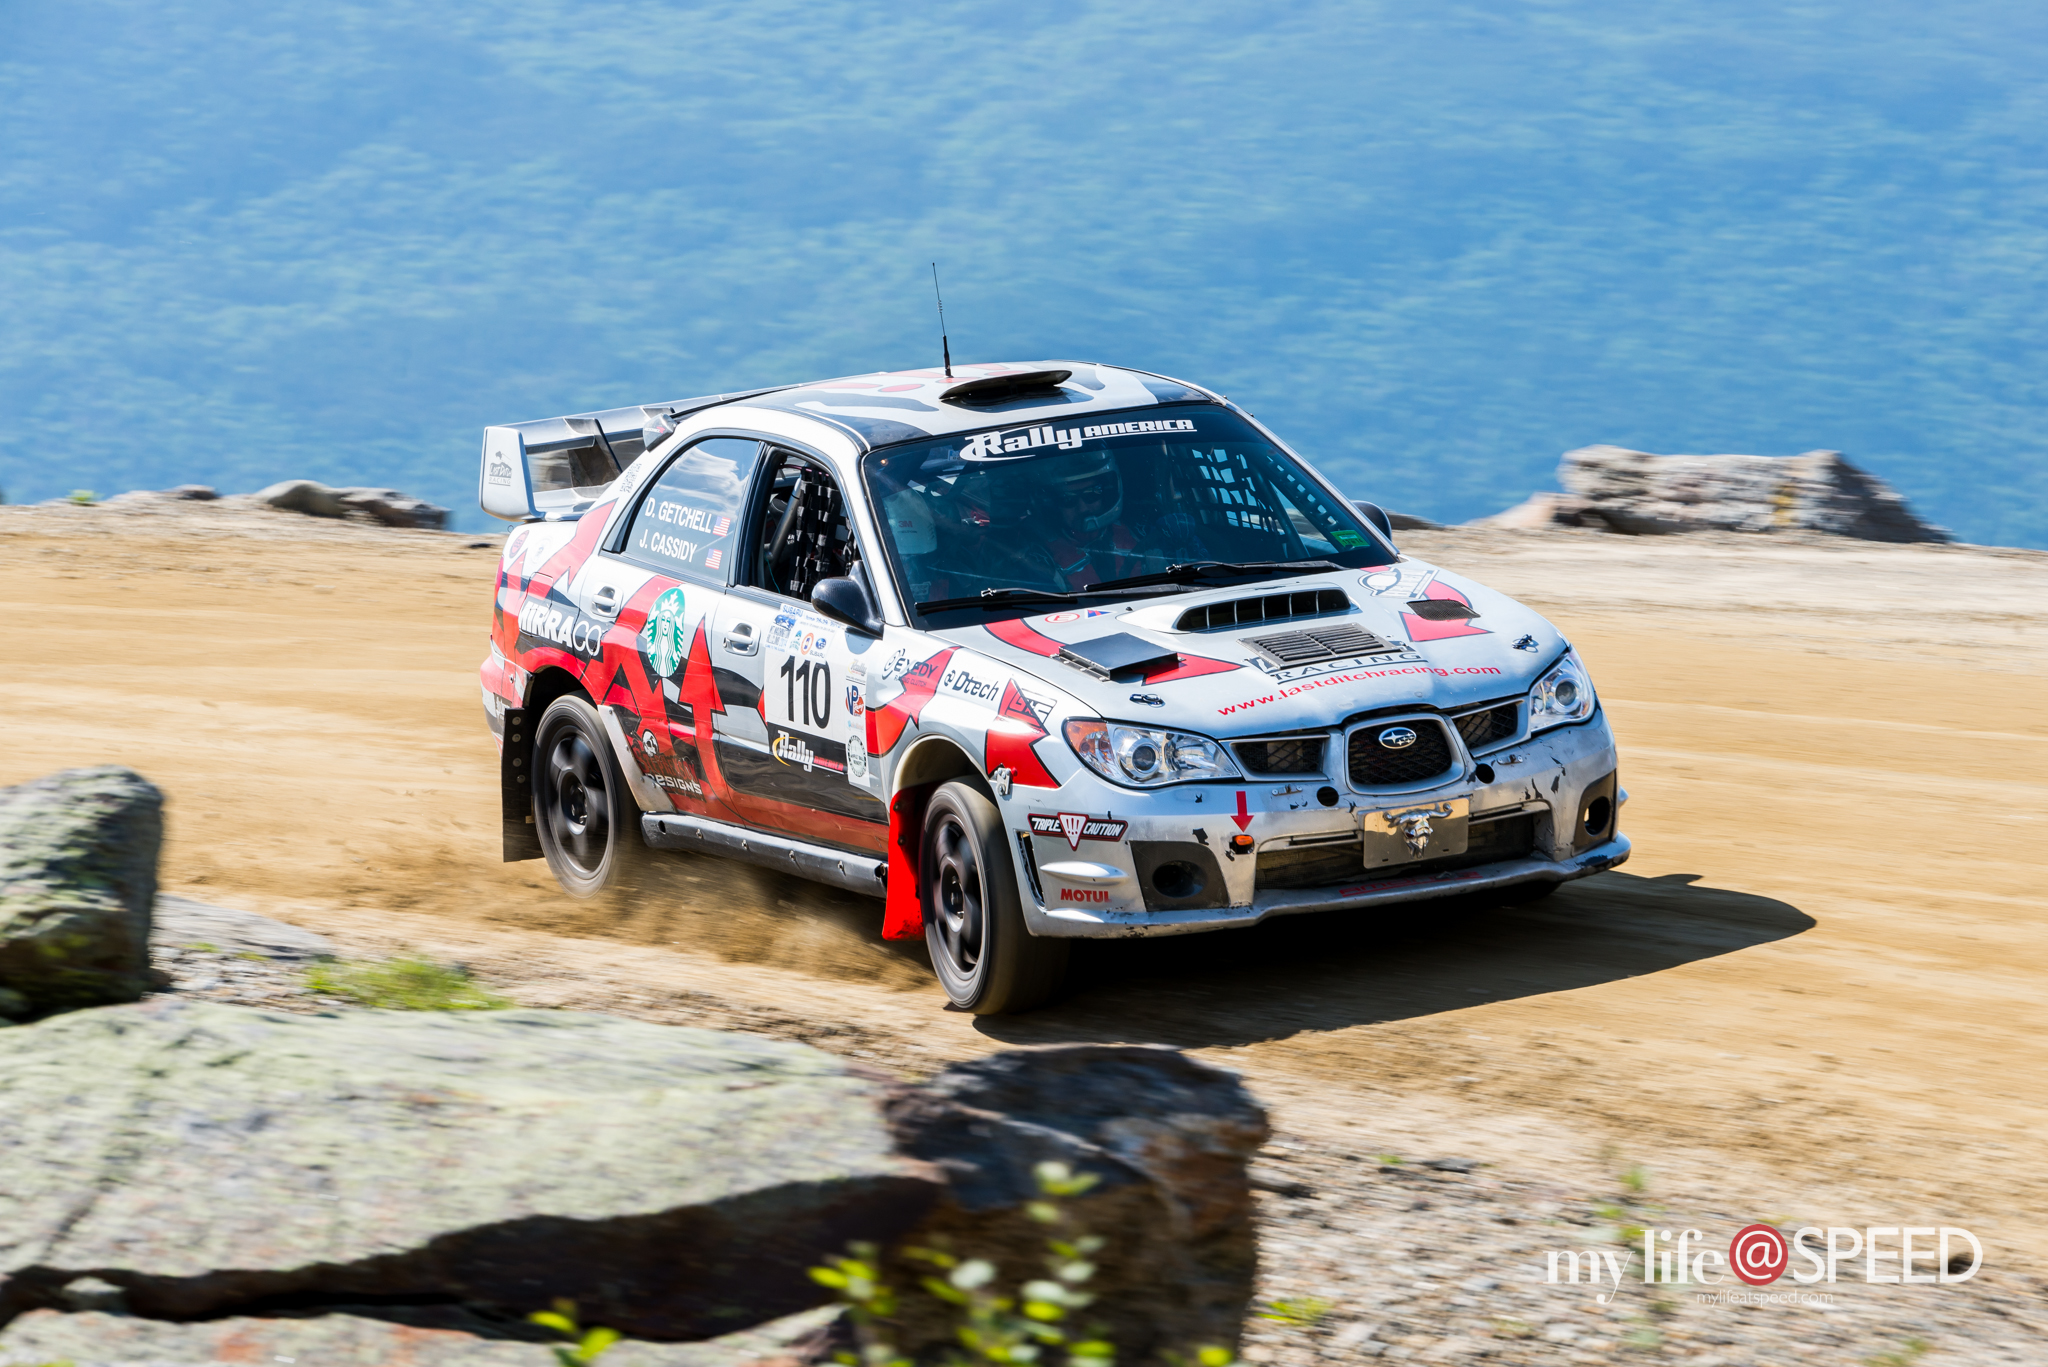 110 Last Ditch Racing, a Maine based Rally team at Cragway Corner